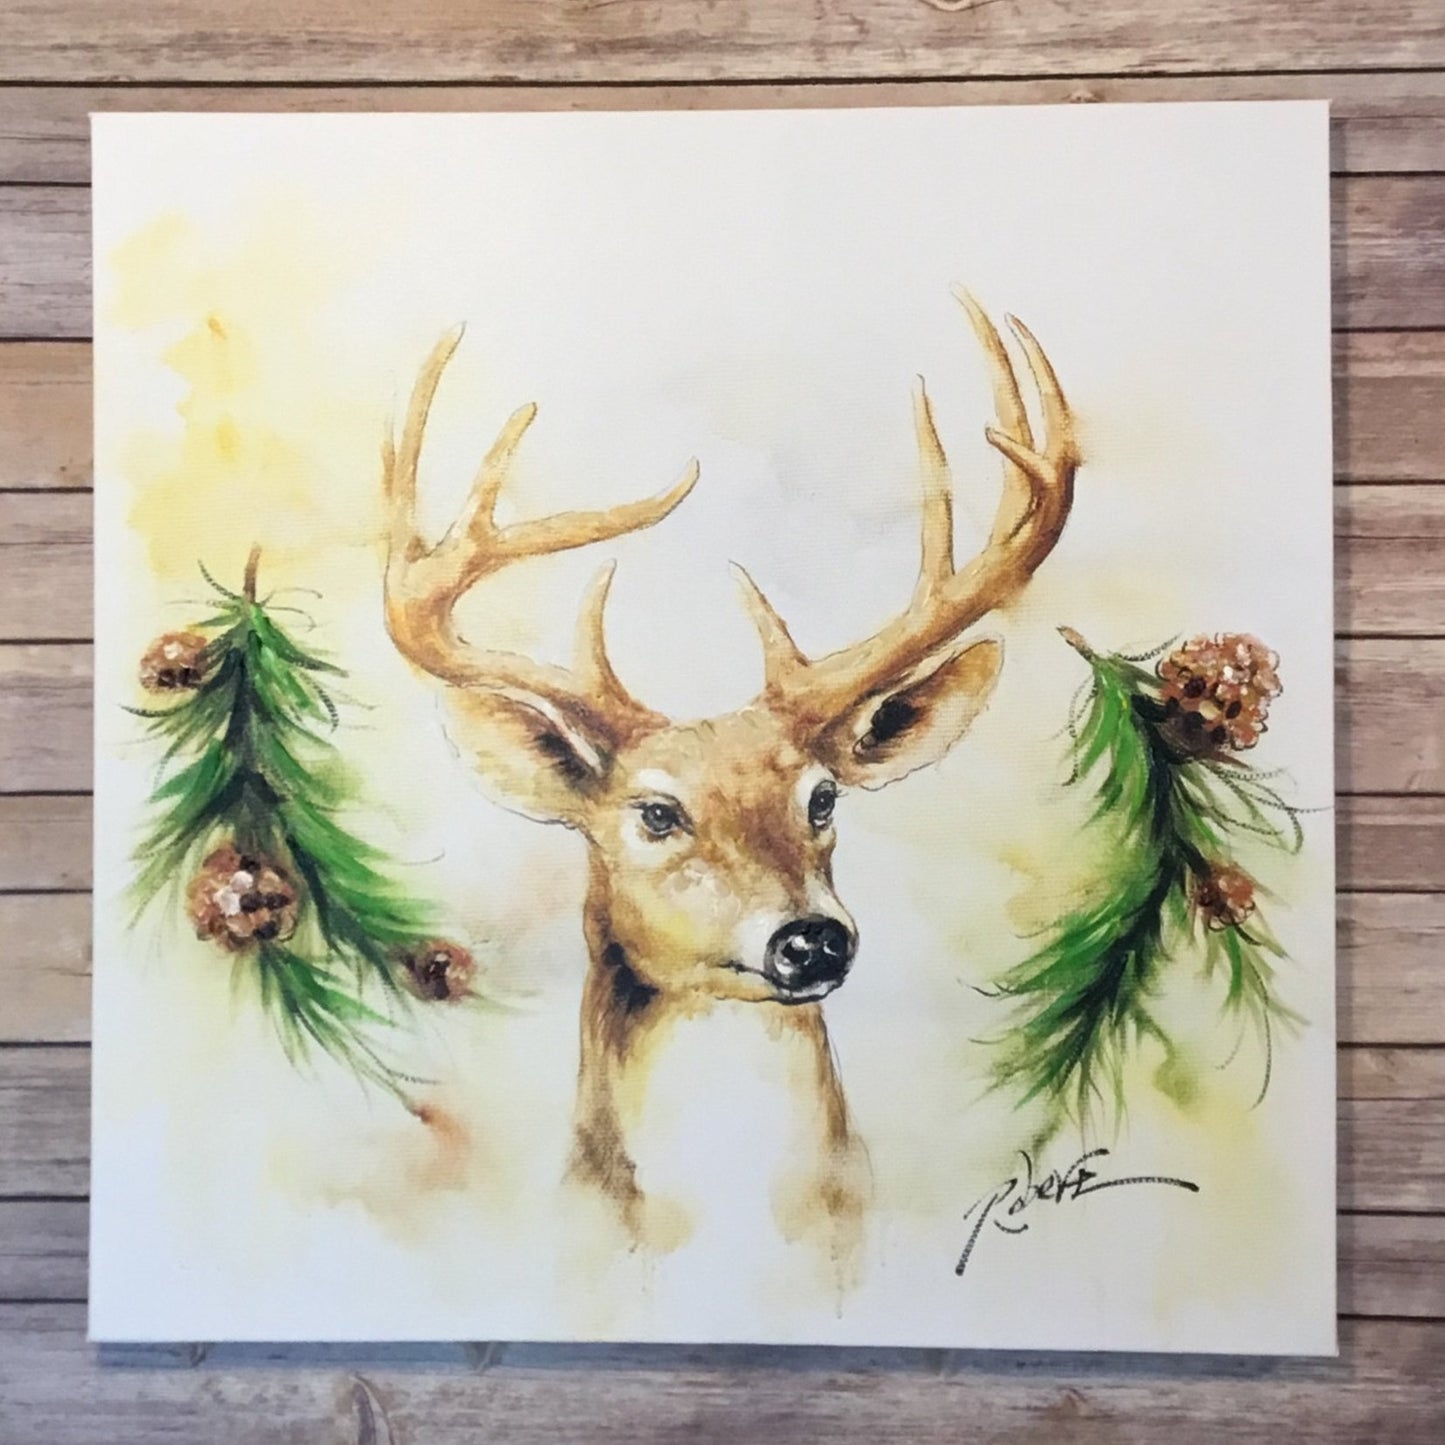 24" x 24" Deer Head with Pine Boughs Oil Painting | FX